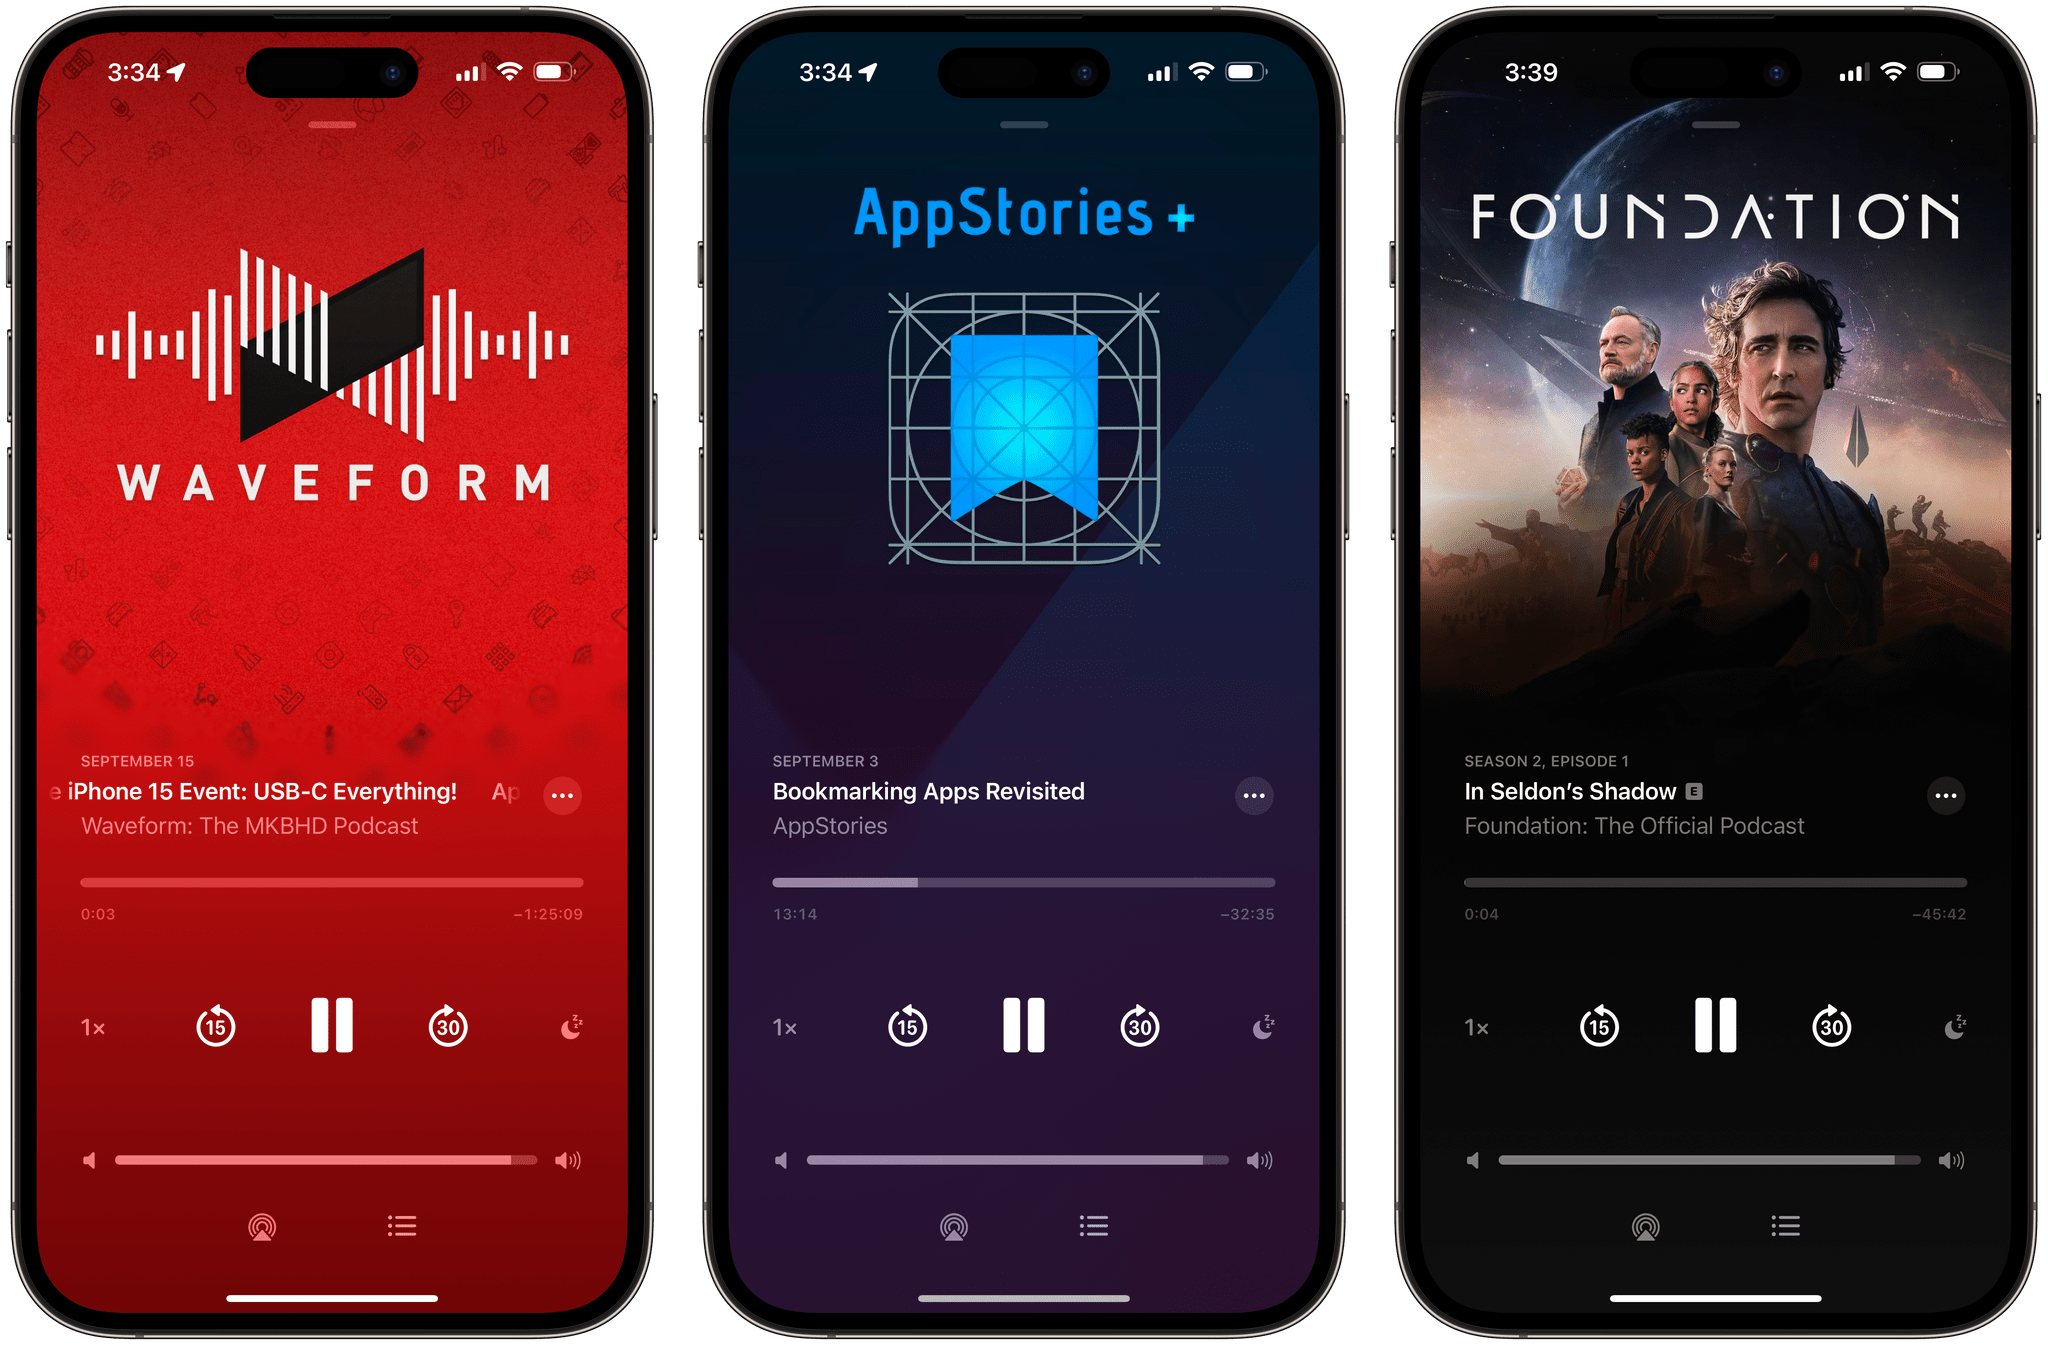 Full-screen art looks fantastic in the new Podcasts app.